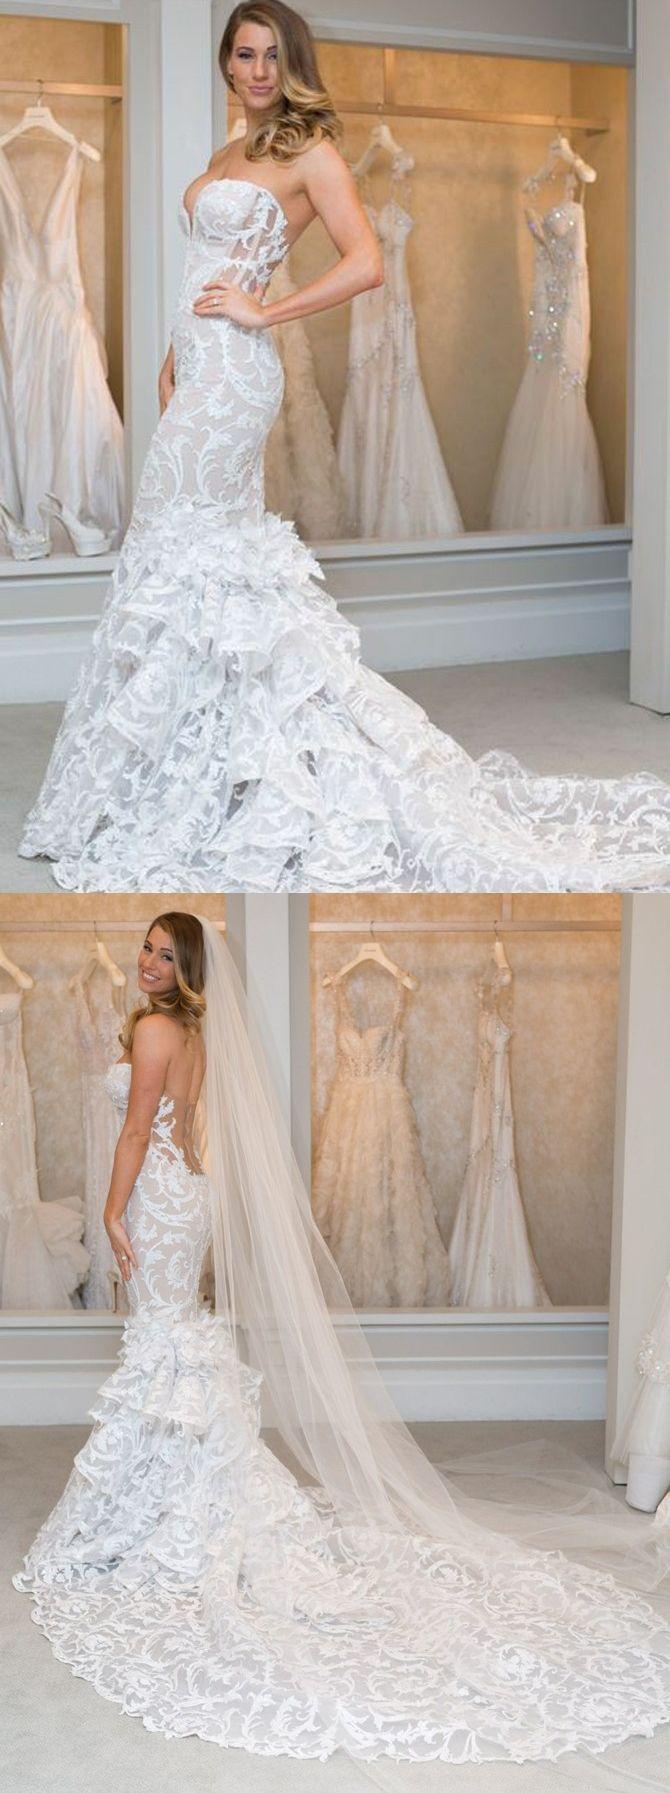 Wedding - Mermaid Wedding Dresses Sweetheart Sweep Train Lace Tulle Sexy Bridal Gown JKS267